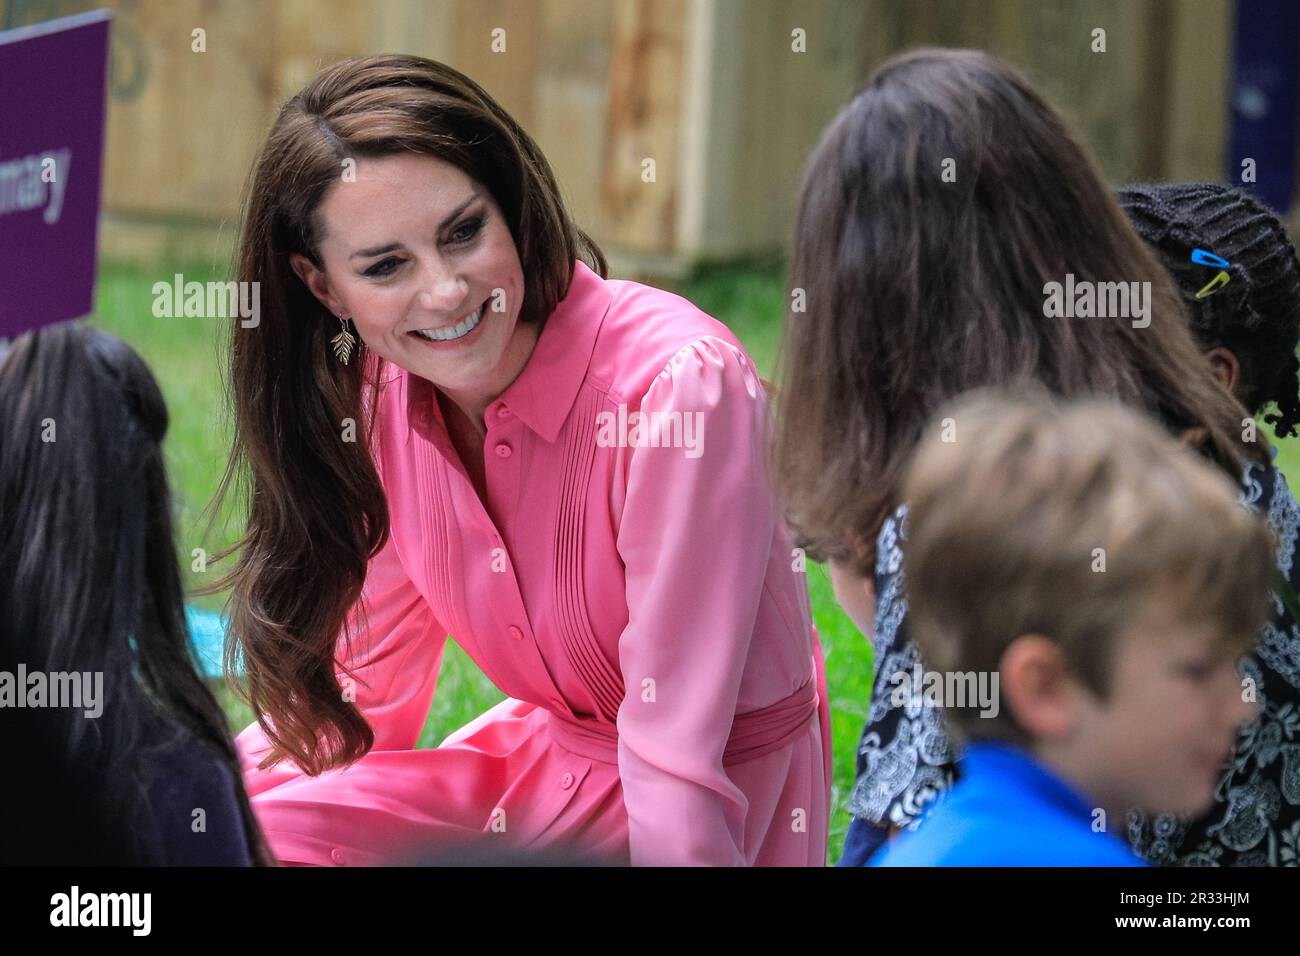 London, UK. 22nd May, 2023. Catherine, the Princess of Wales visits Chelsea Flower Show. She first meets school children for the first ever children's picknick at the show, then visited the Savill's Garden, Samaritans Garden and garden of the Royal Enthomological Society. Press day at the annual RHS Chelsea Flower Show, showcasing garden designs, products, floral displays and all things horticultural from May 23-27. Credit: Imageplotter/Alamy Live News Stock Photo